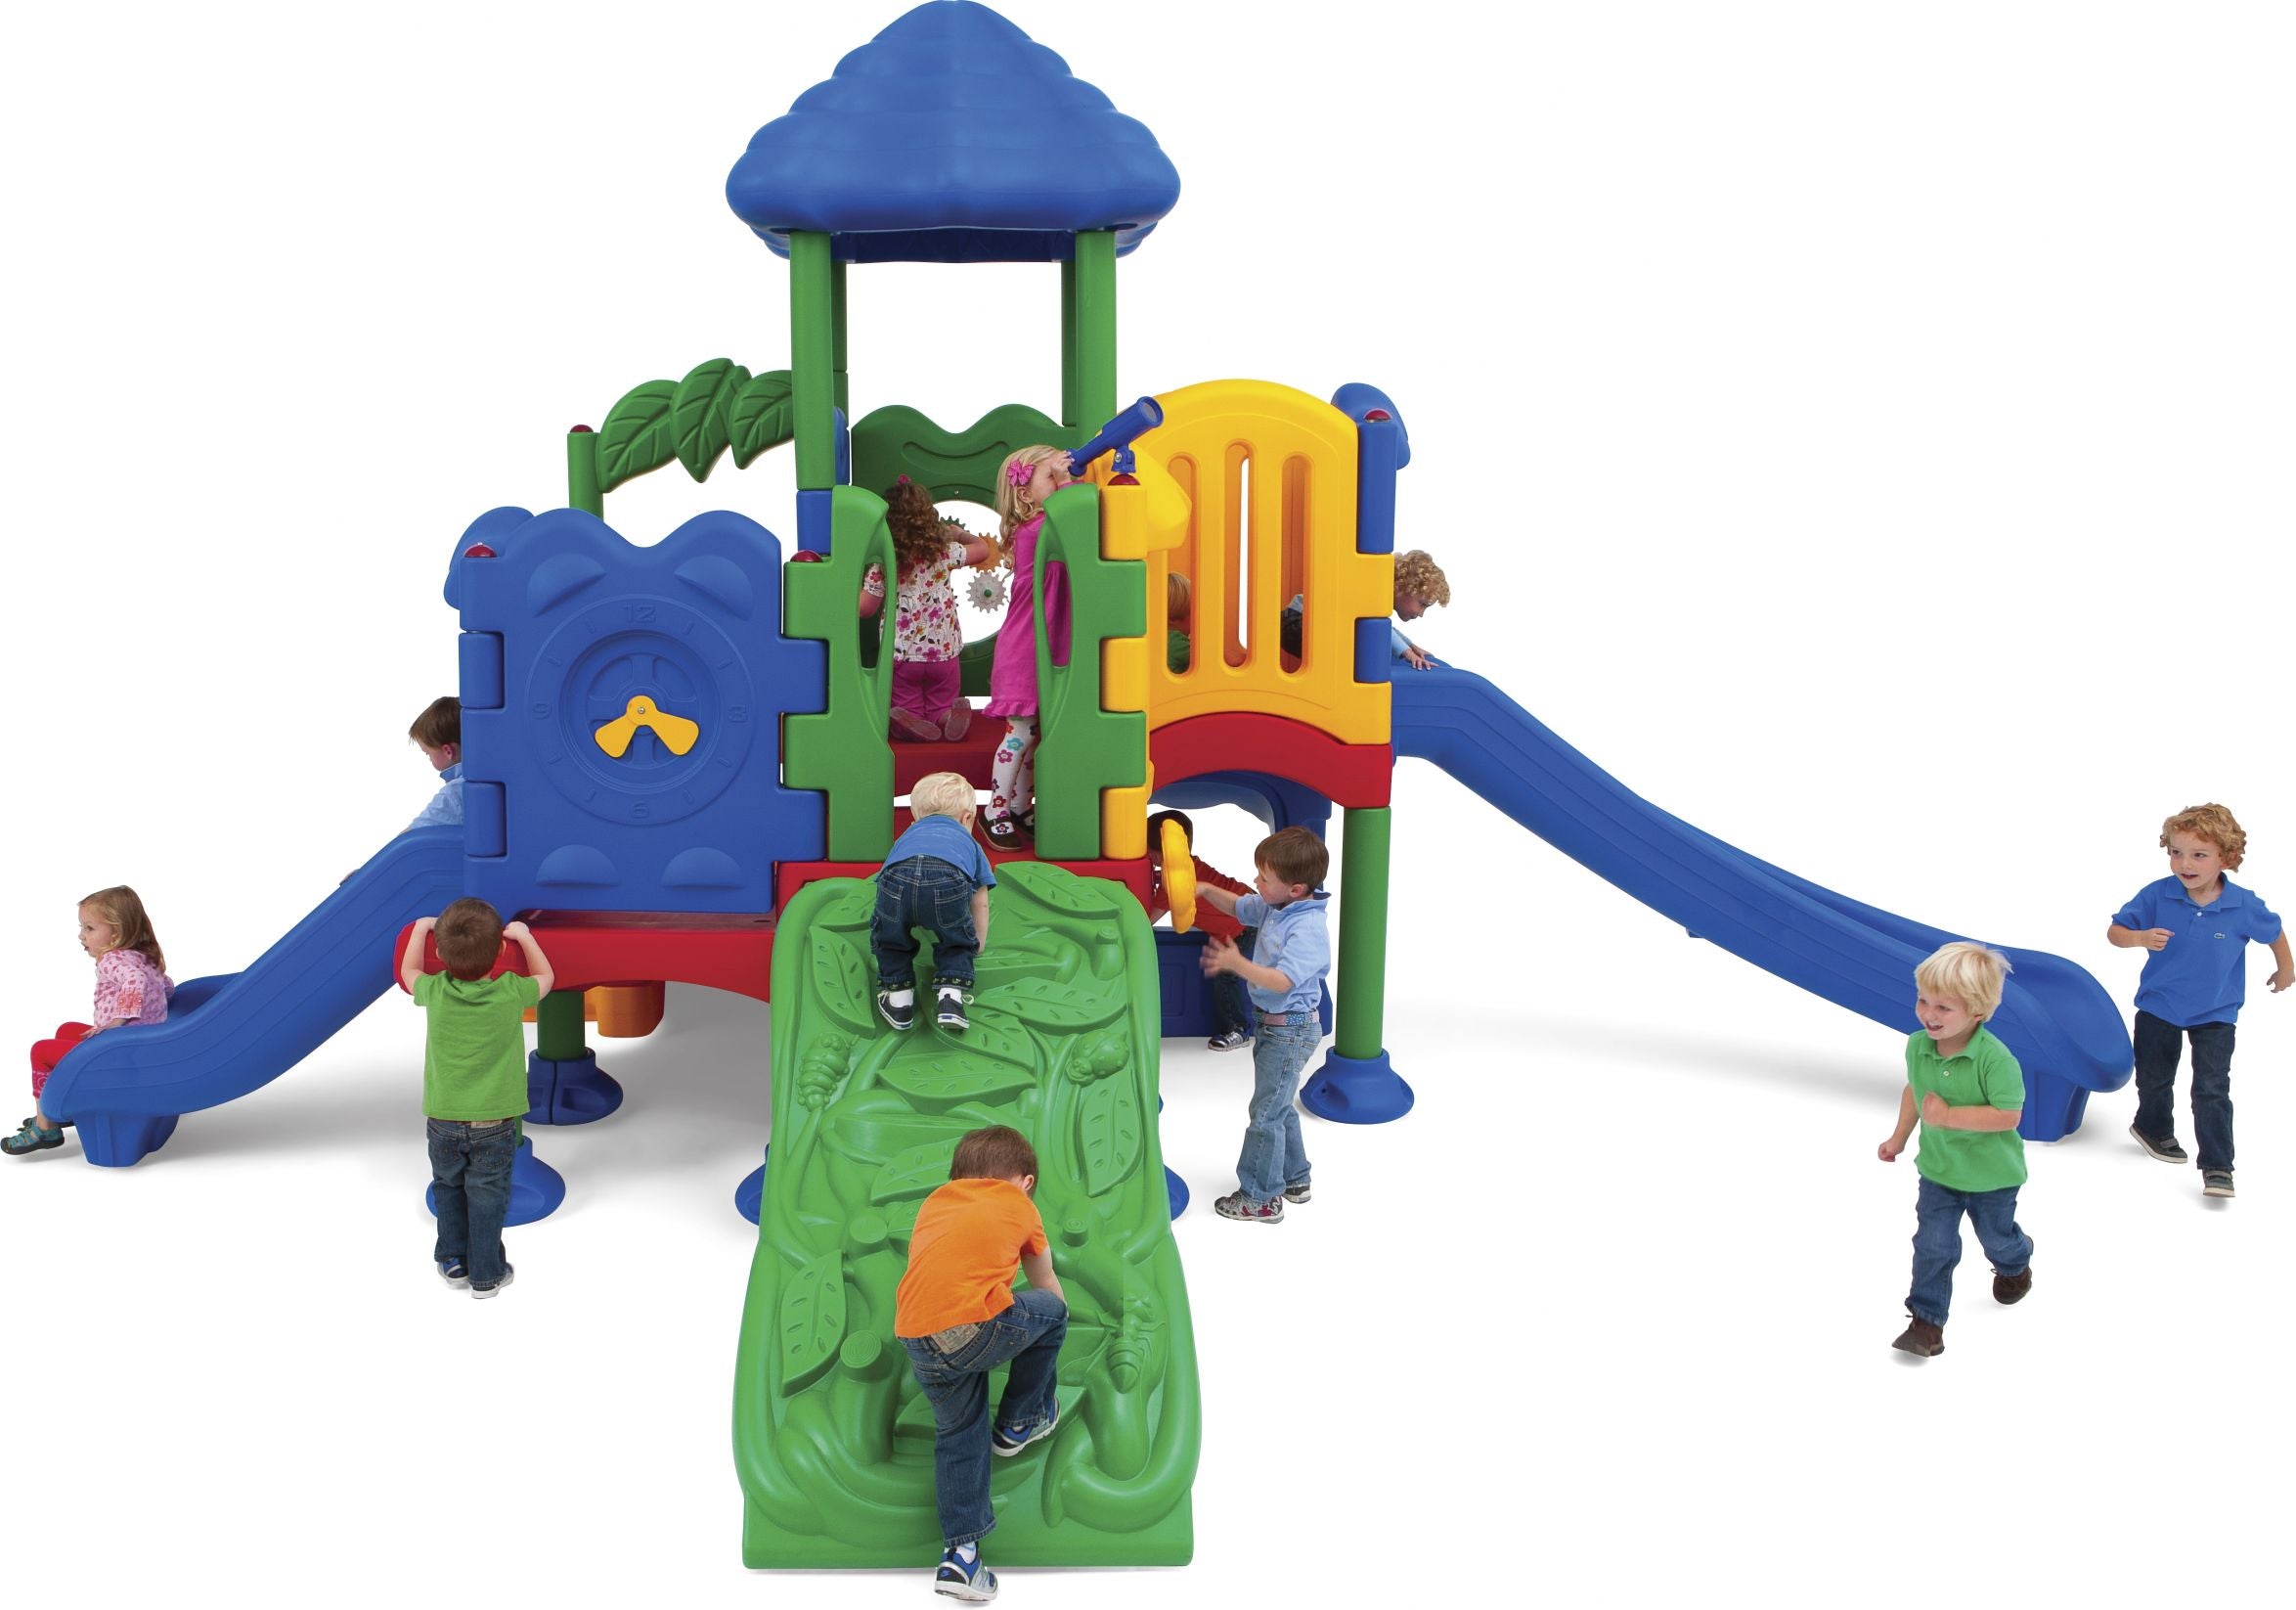 Range Learning Centre - Simplified Playgrounds